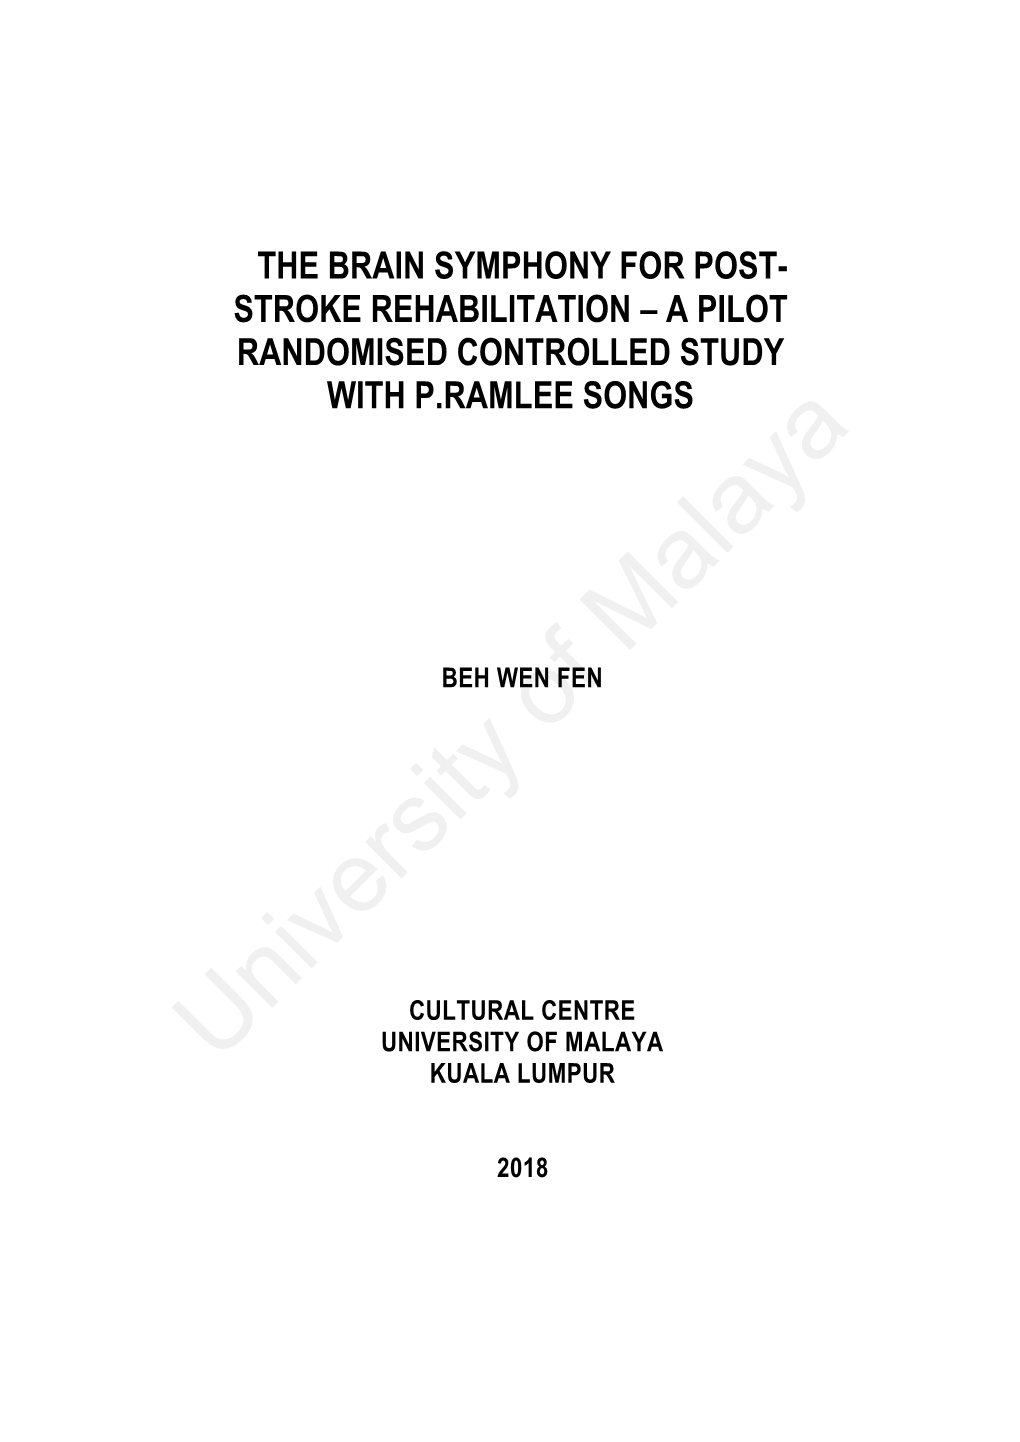 Stroke Rehabilitation – a Pilot Randomised Controlled Study with P.Ramlee Songs